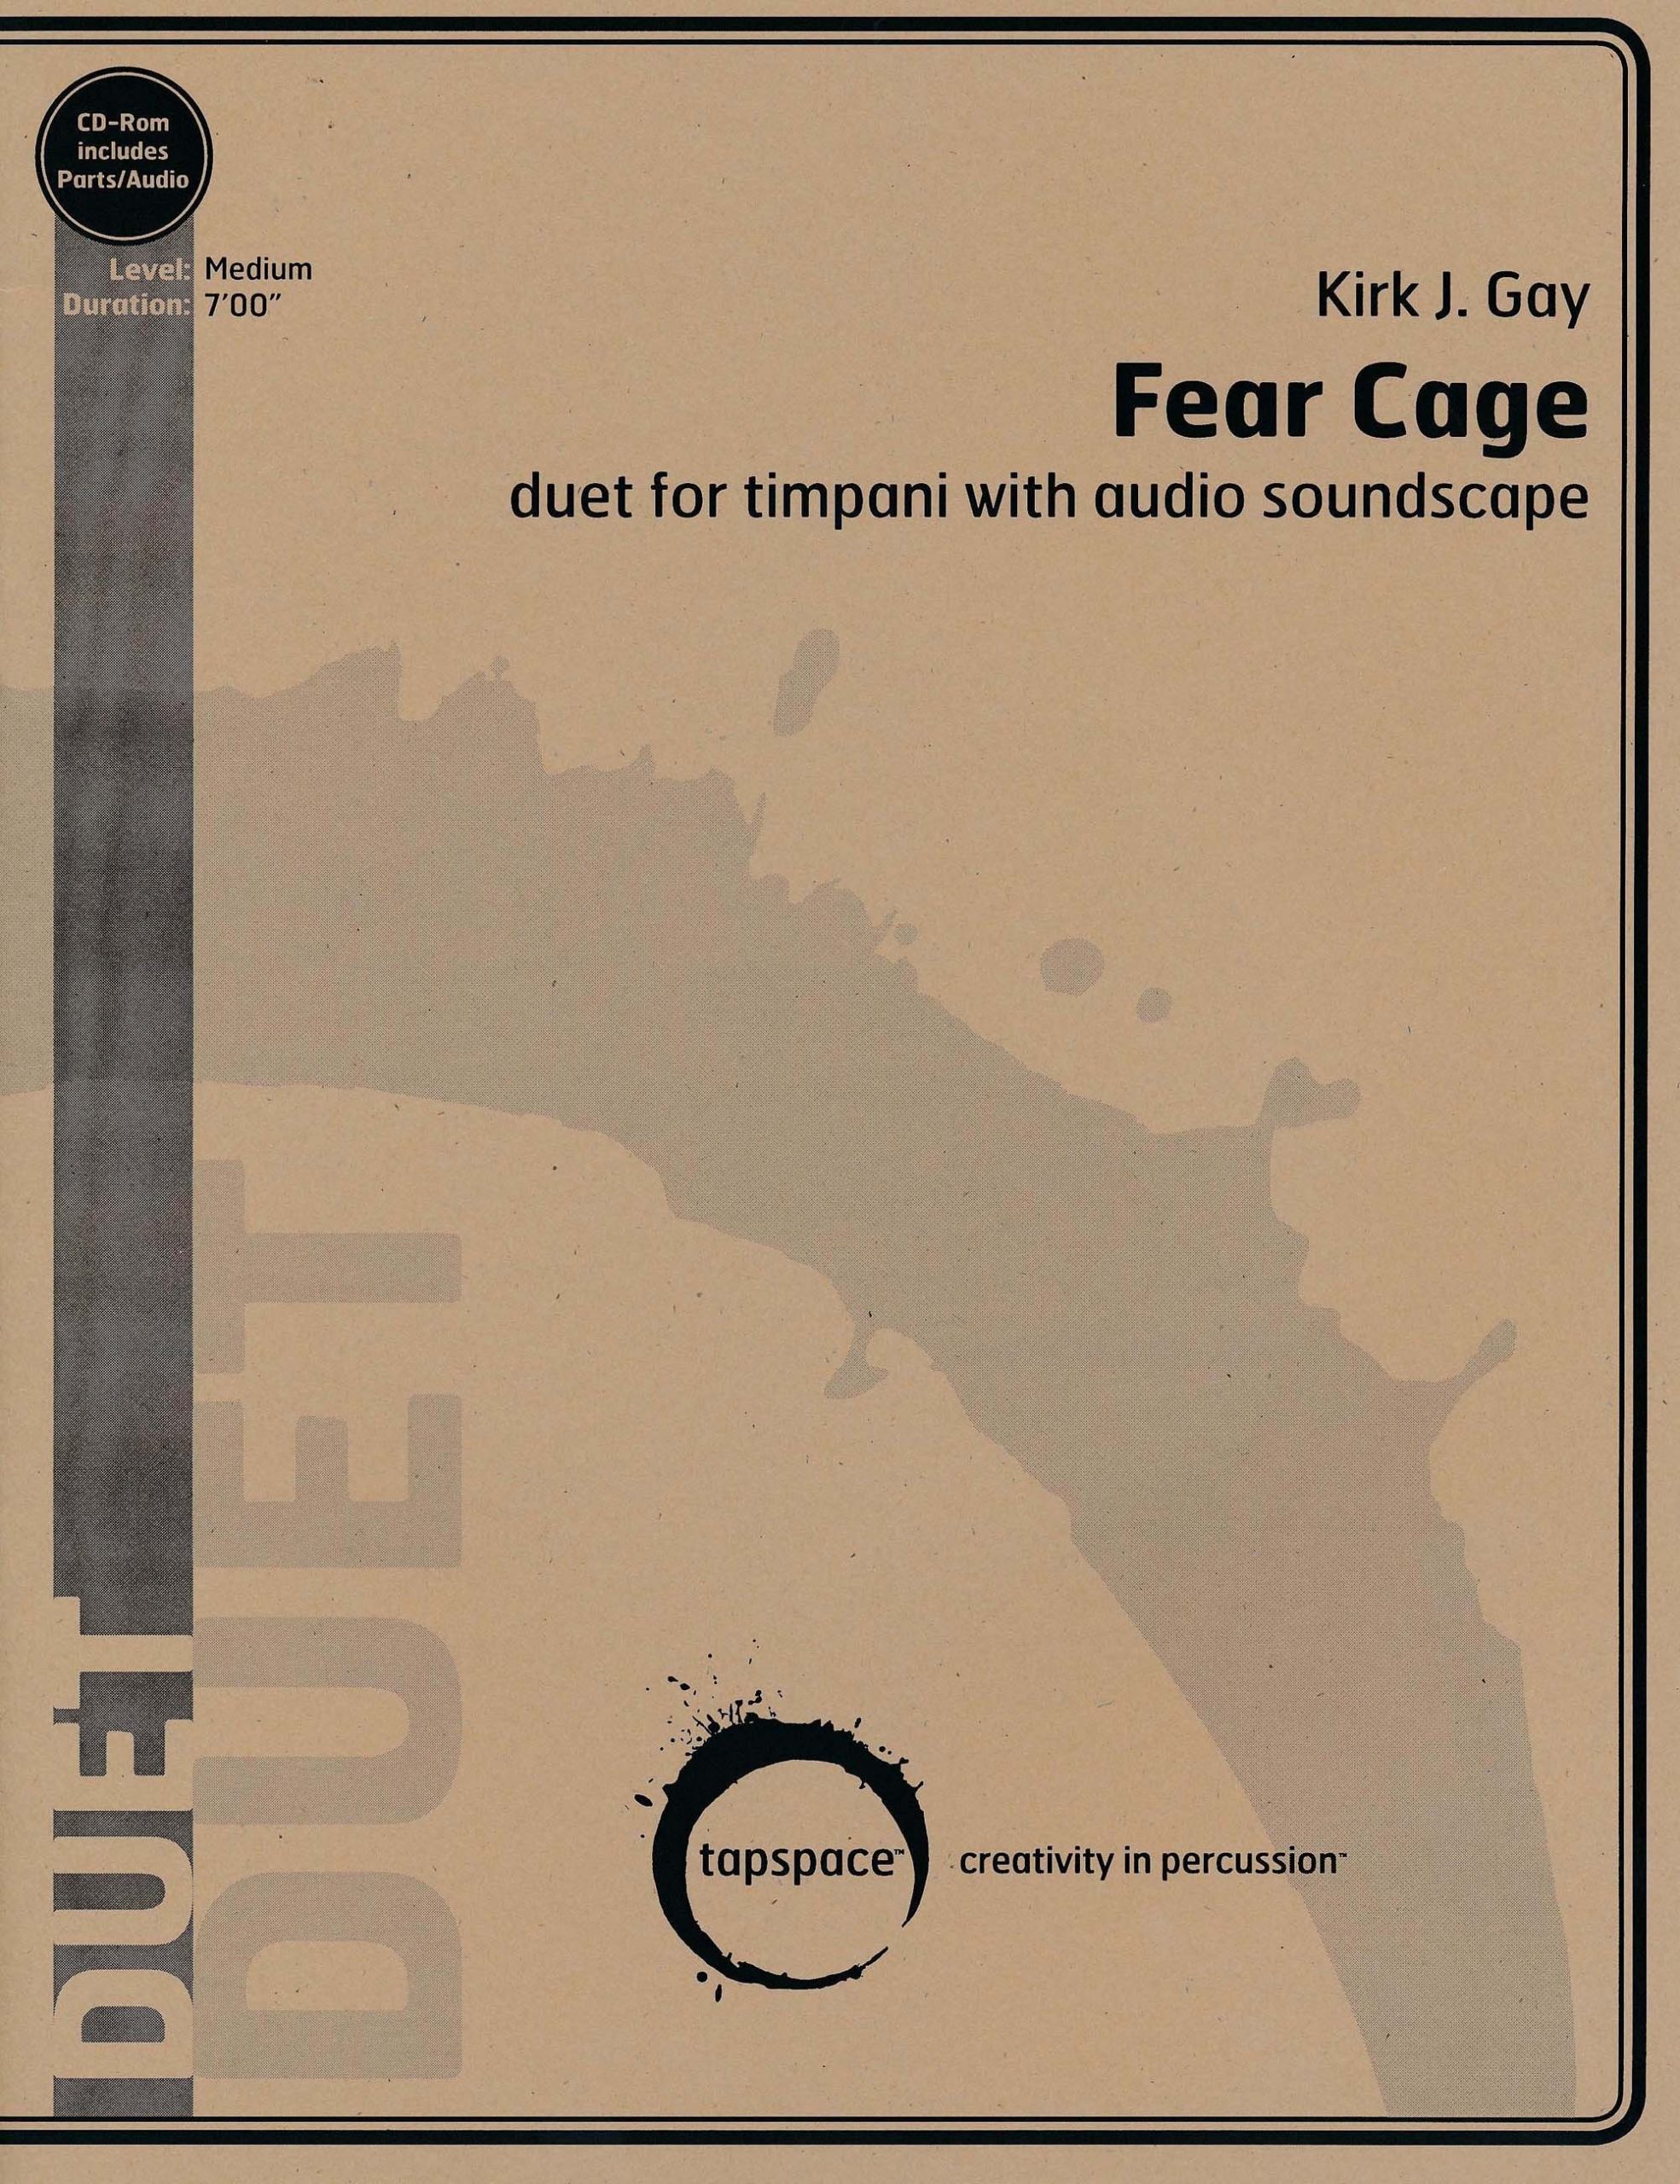 Fear Cage by Kirk J. Gay